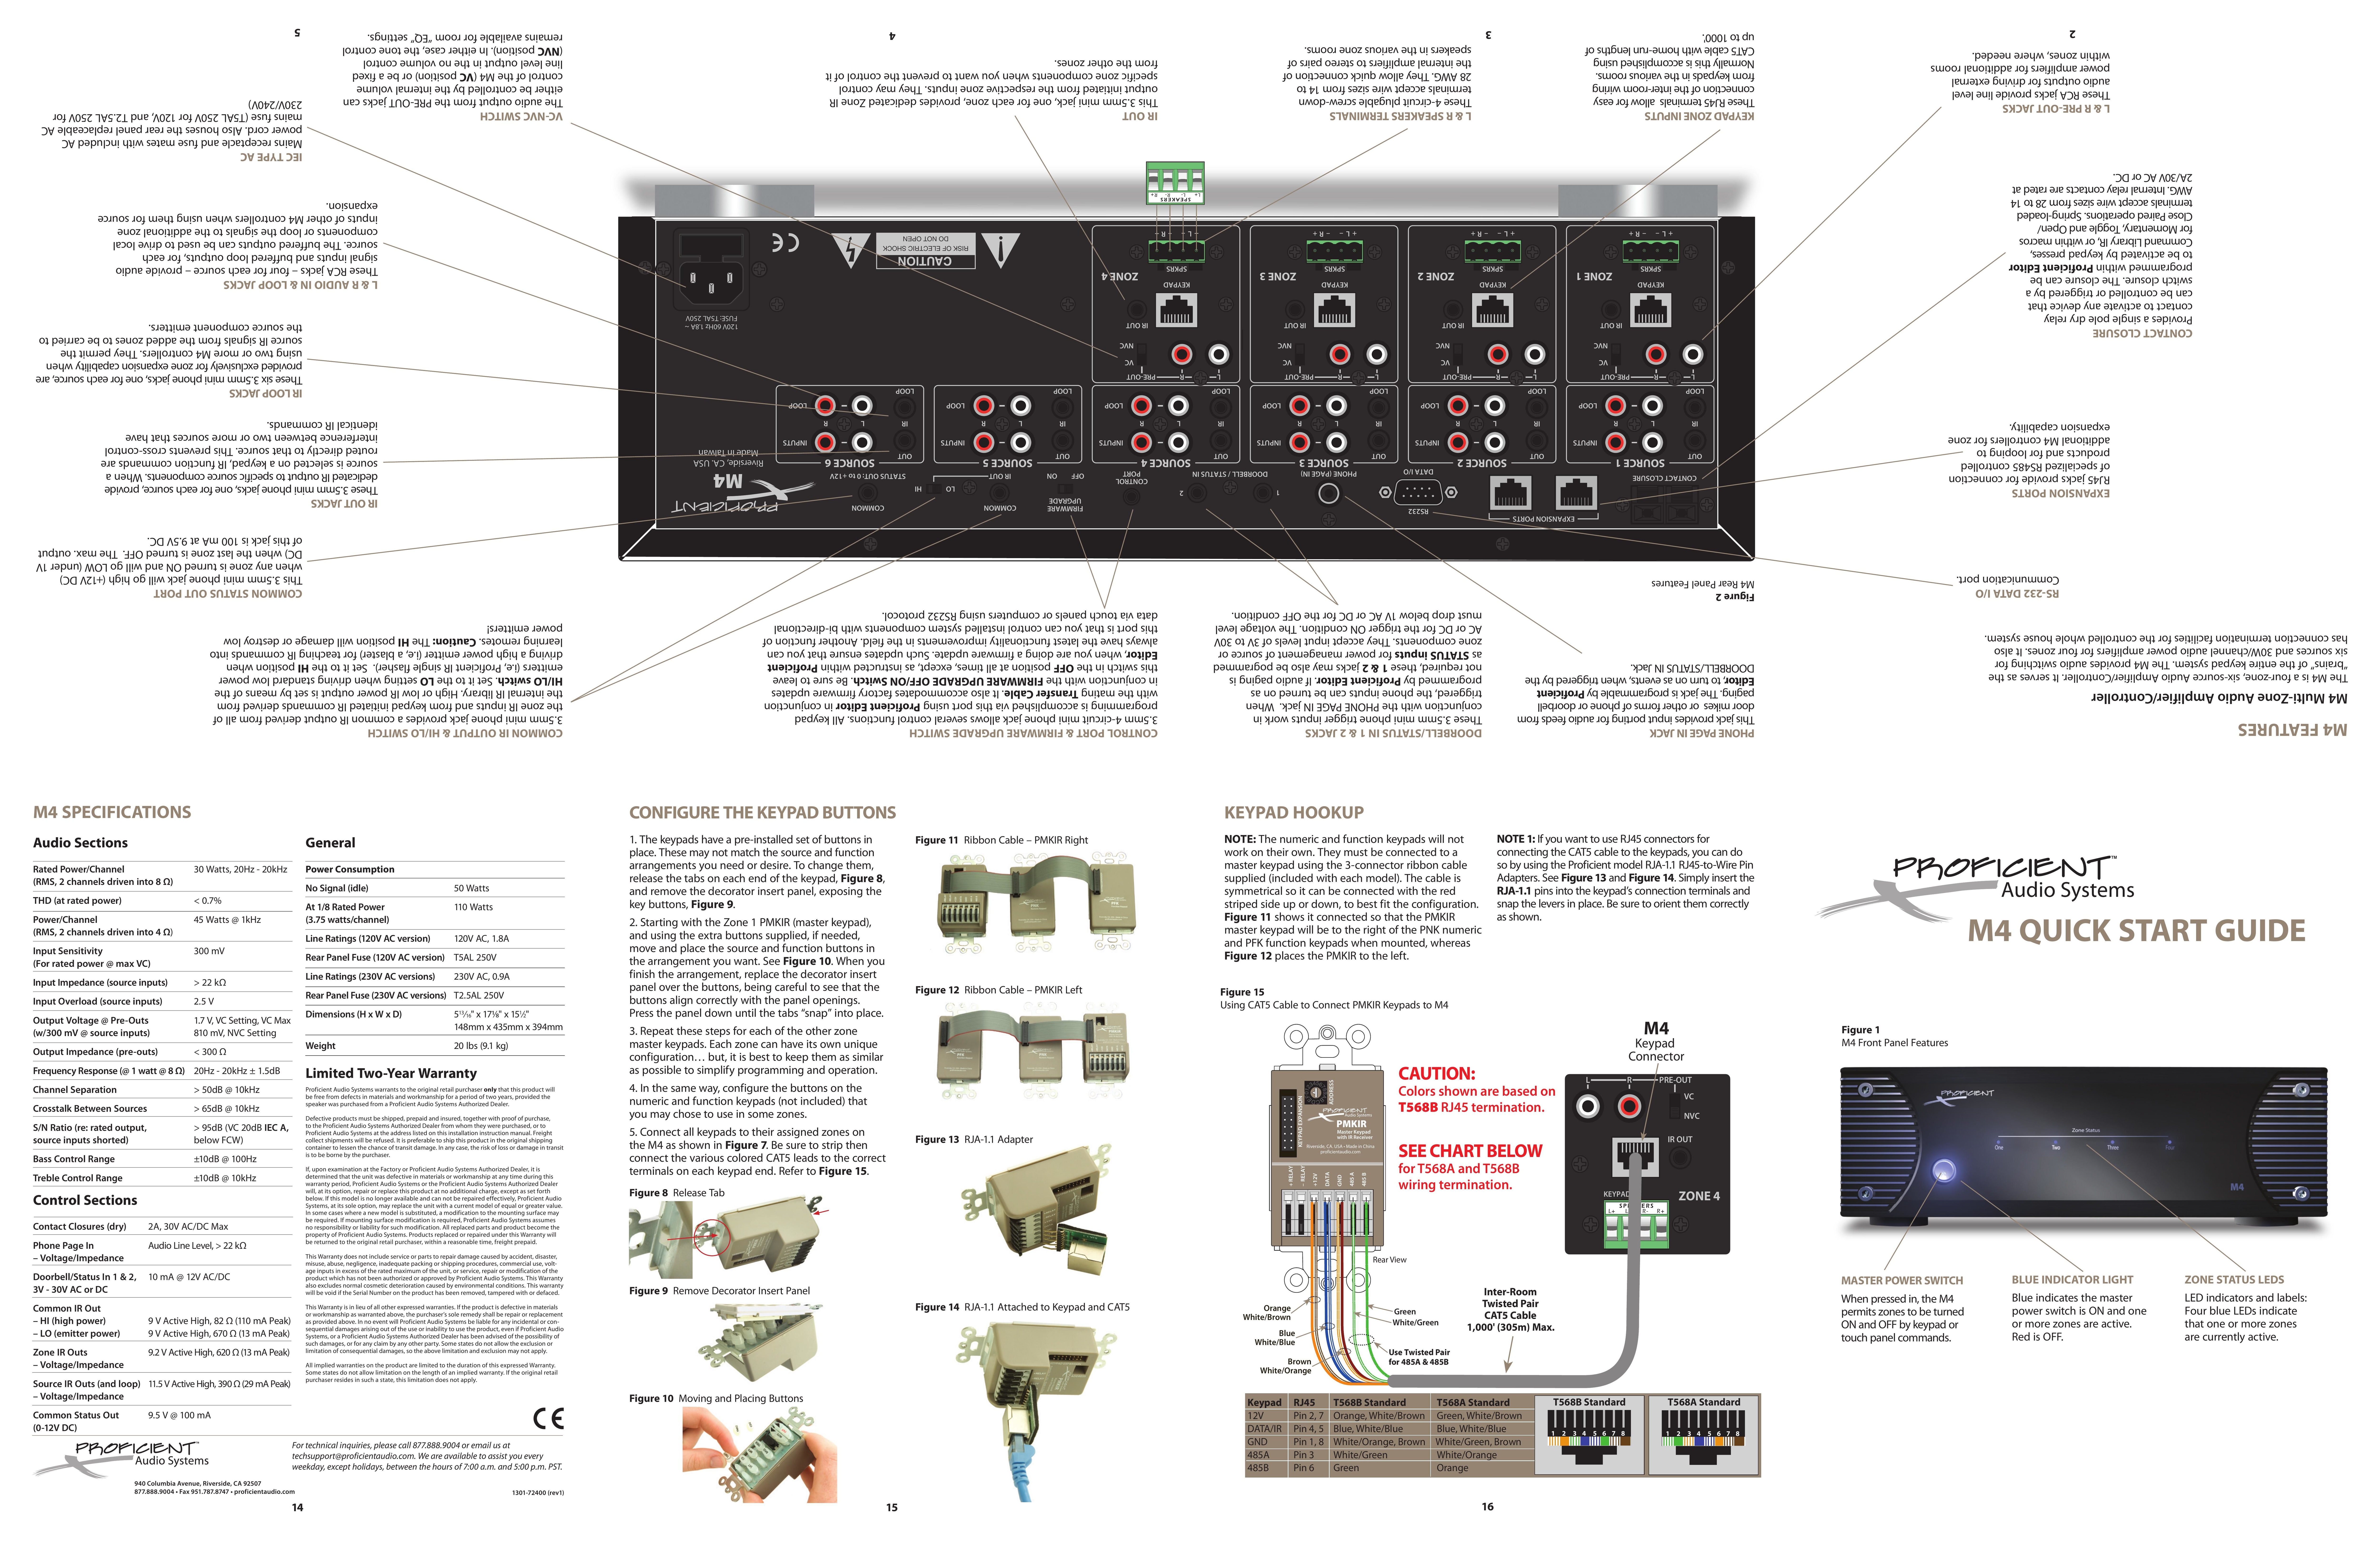 Proficient Audio Systems M4 Car Stereo System User Manual